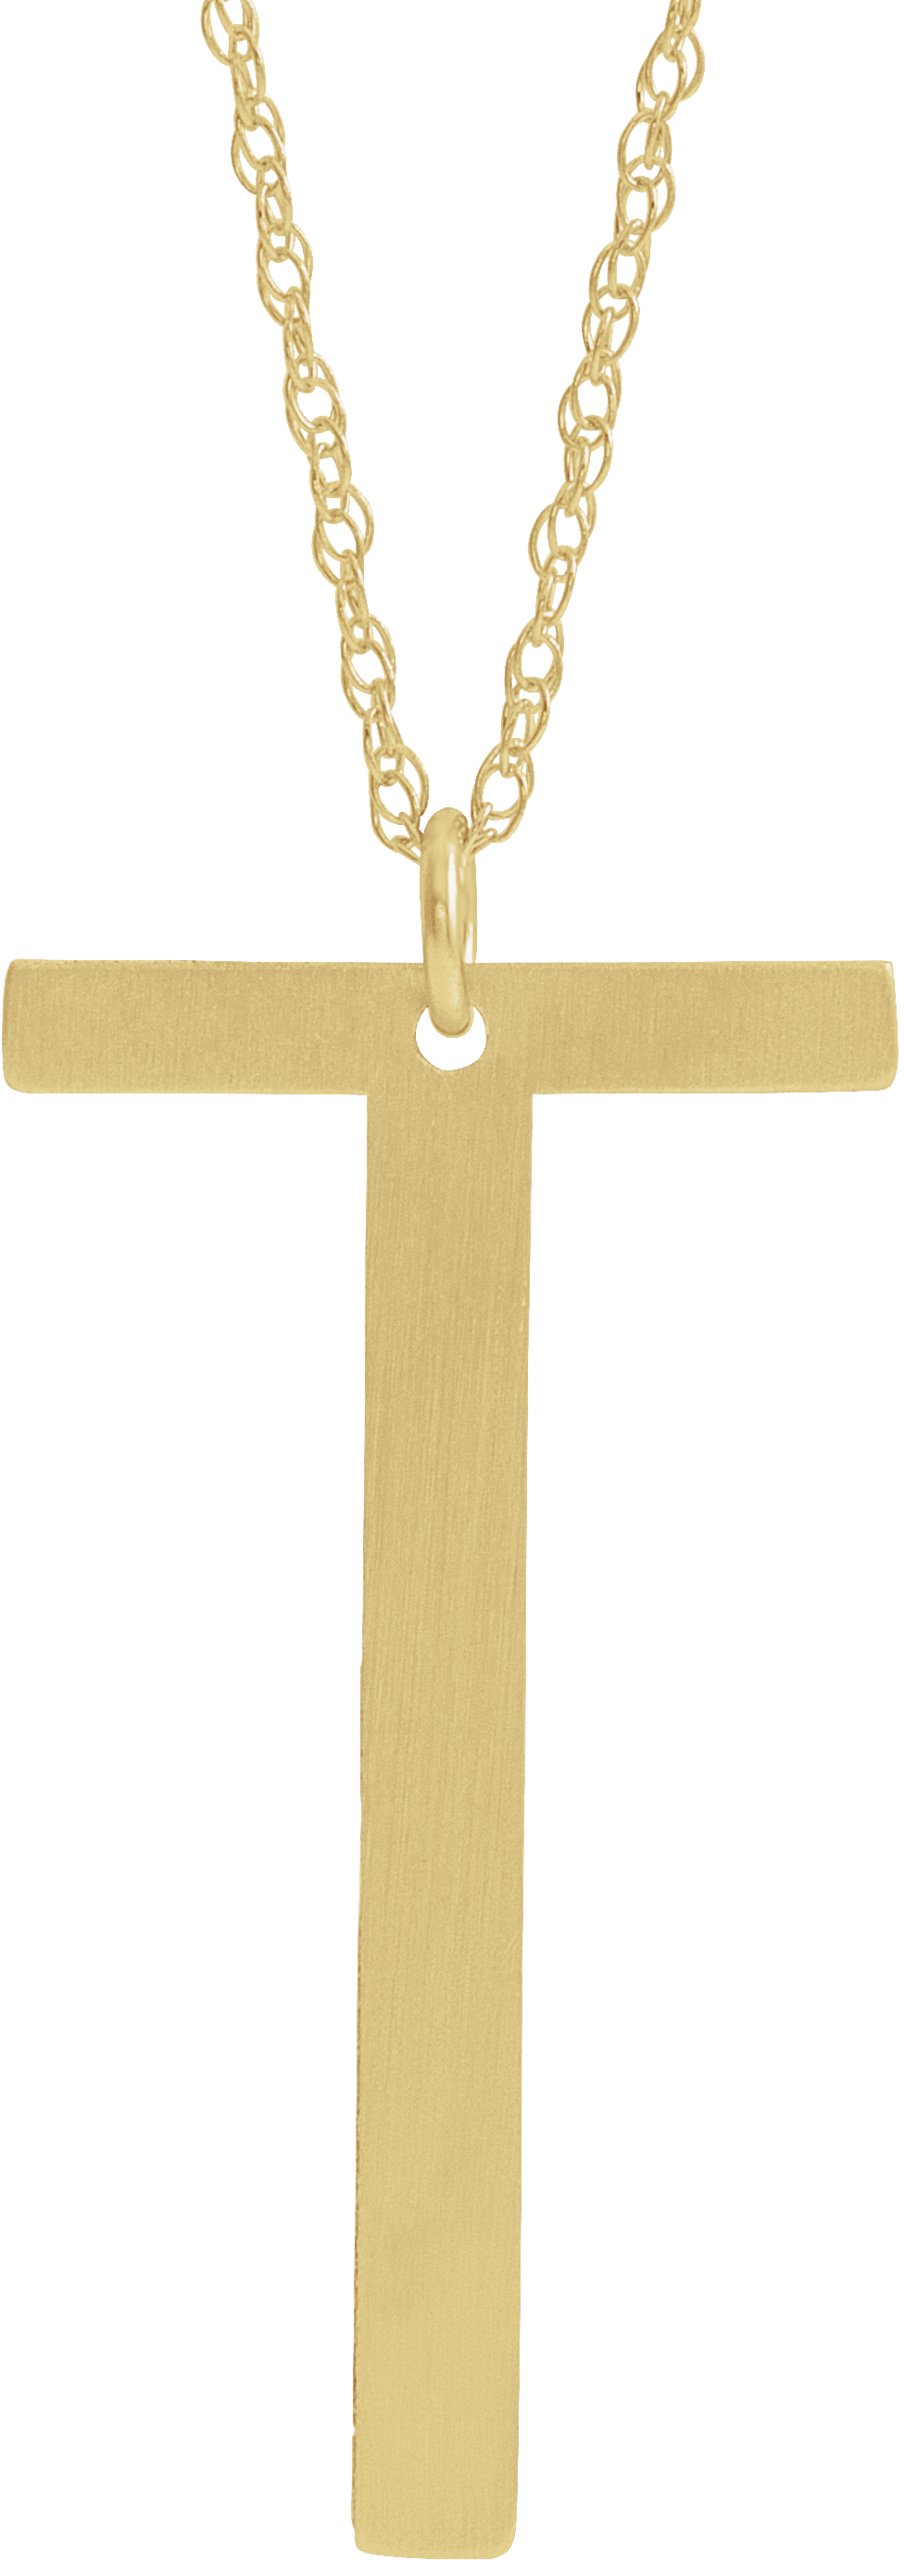 14K Yellow Block Initial T 16-18" Necklace with Brush Finish